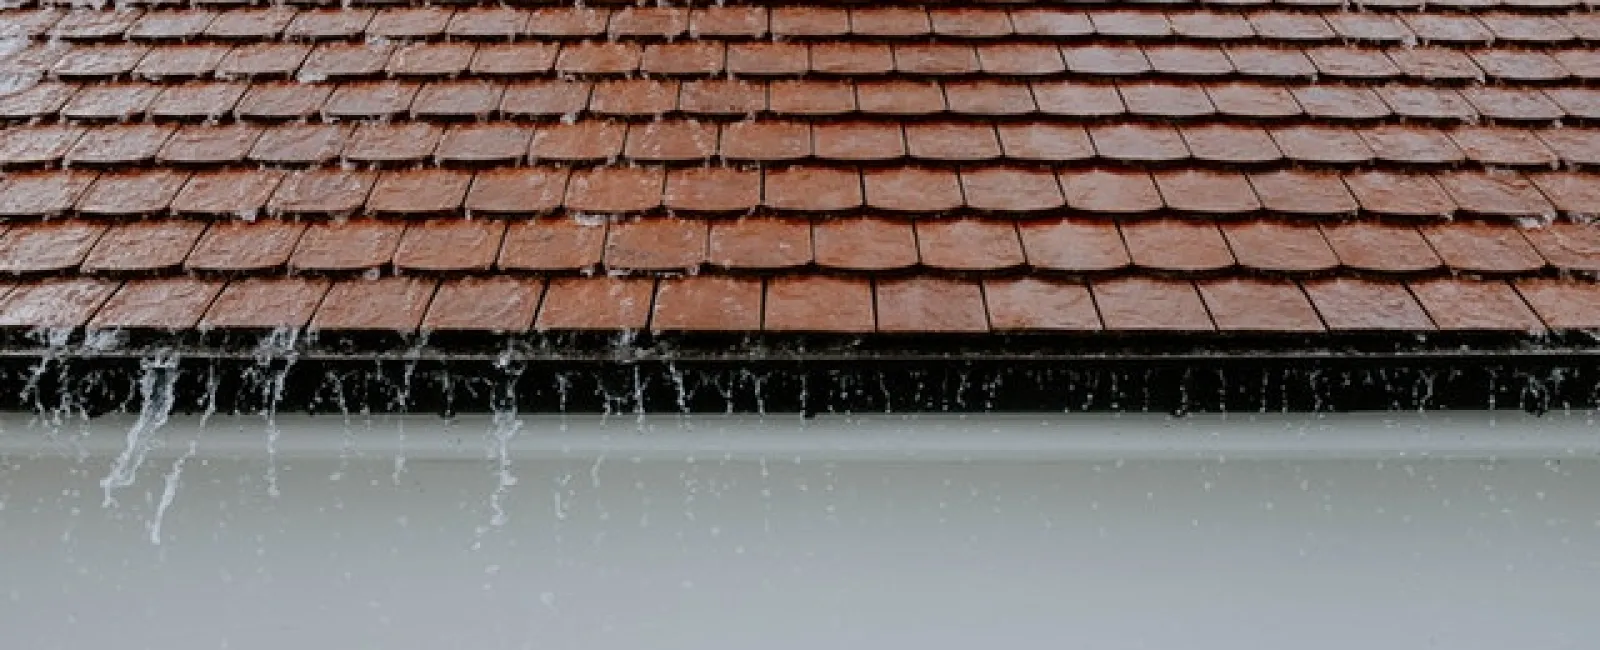 What are the Major Benefits of Roof Coating For Businesses?